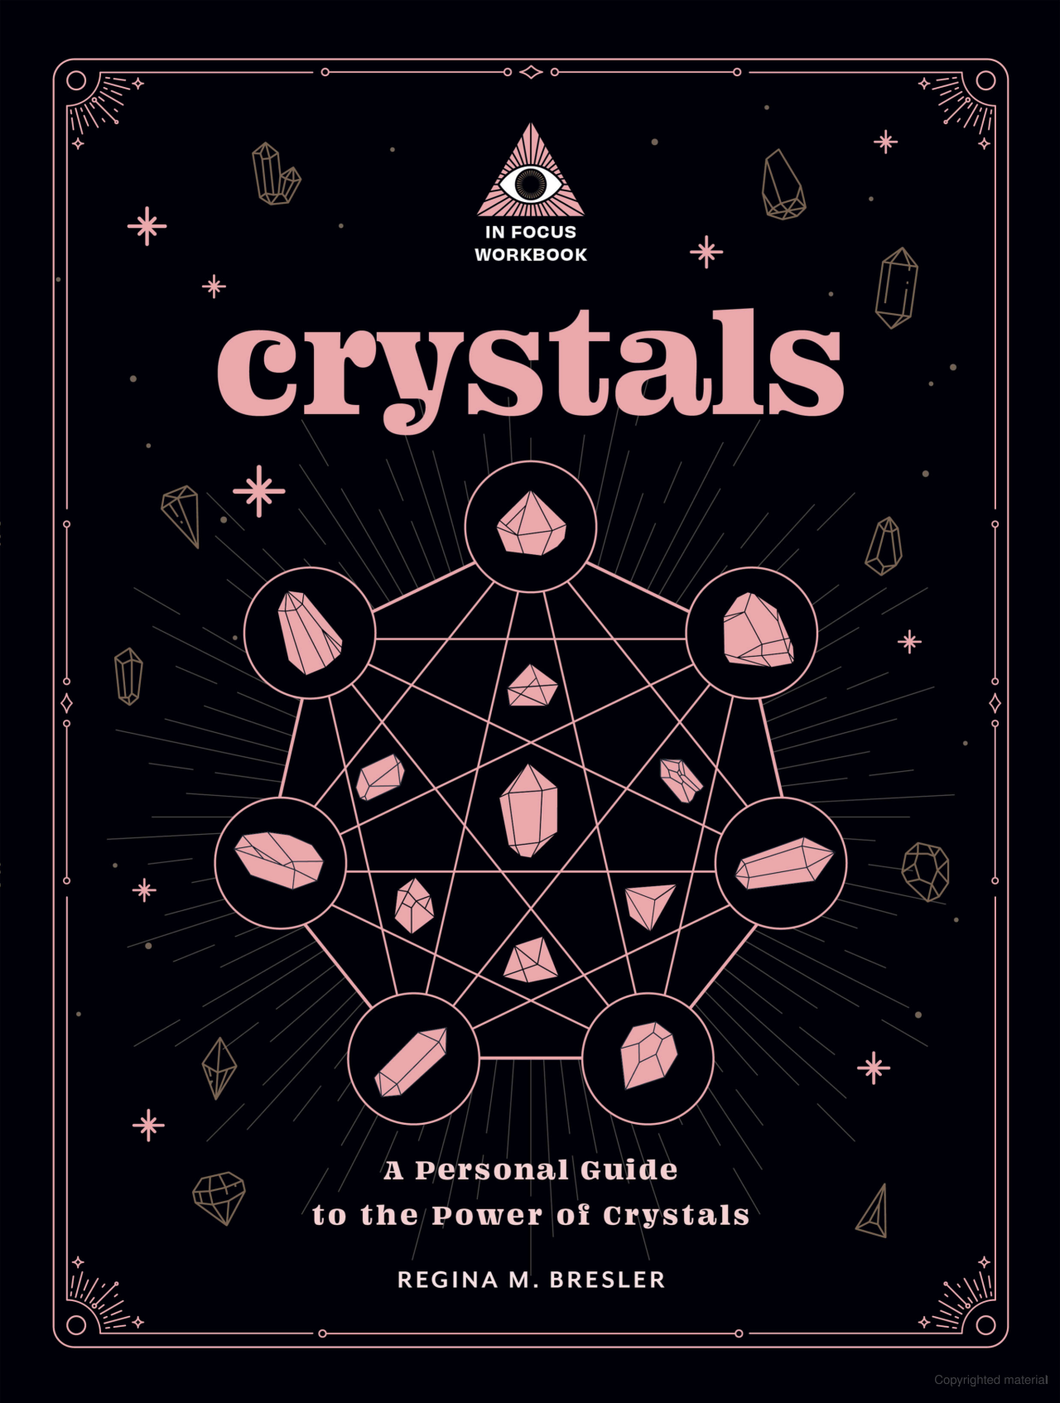 Crystals: A Personal Guide